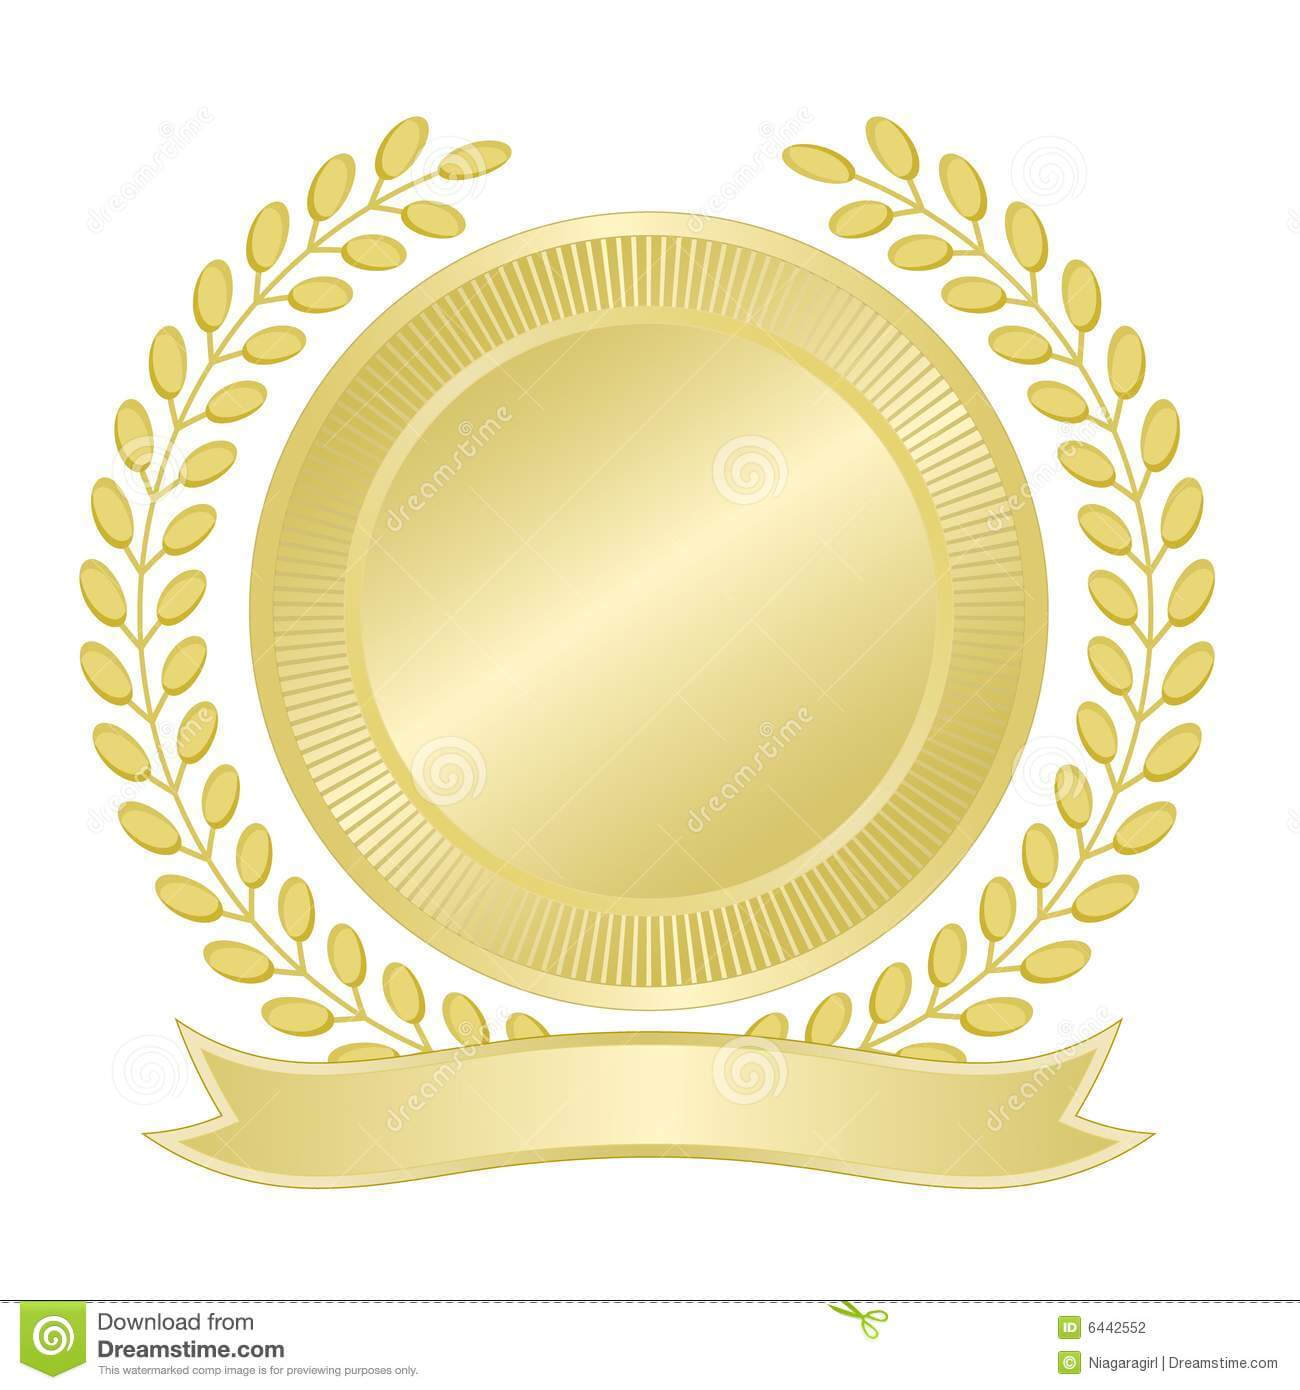 Blank Gold Seal Stock Vector. Illustration Of Seal, Wreath Pertaining To Blank Seal Template